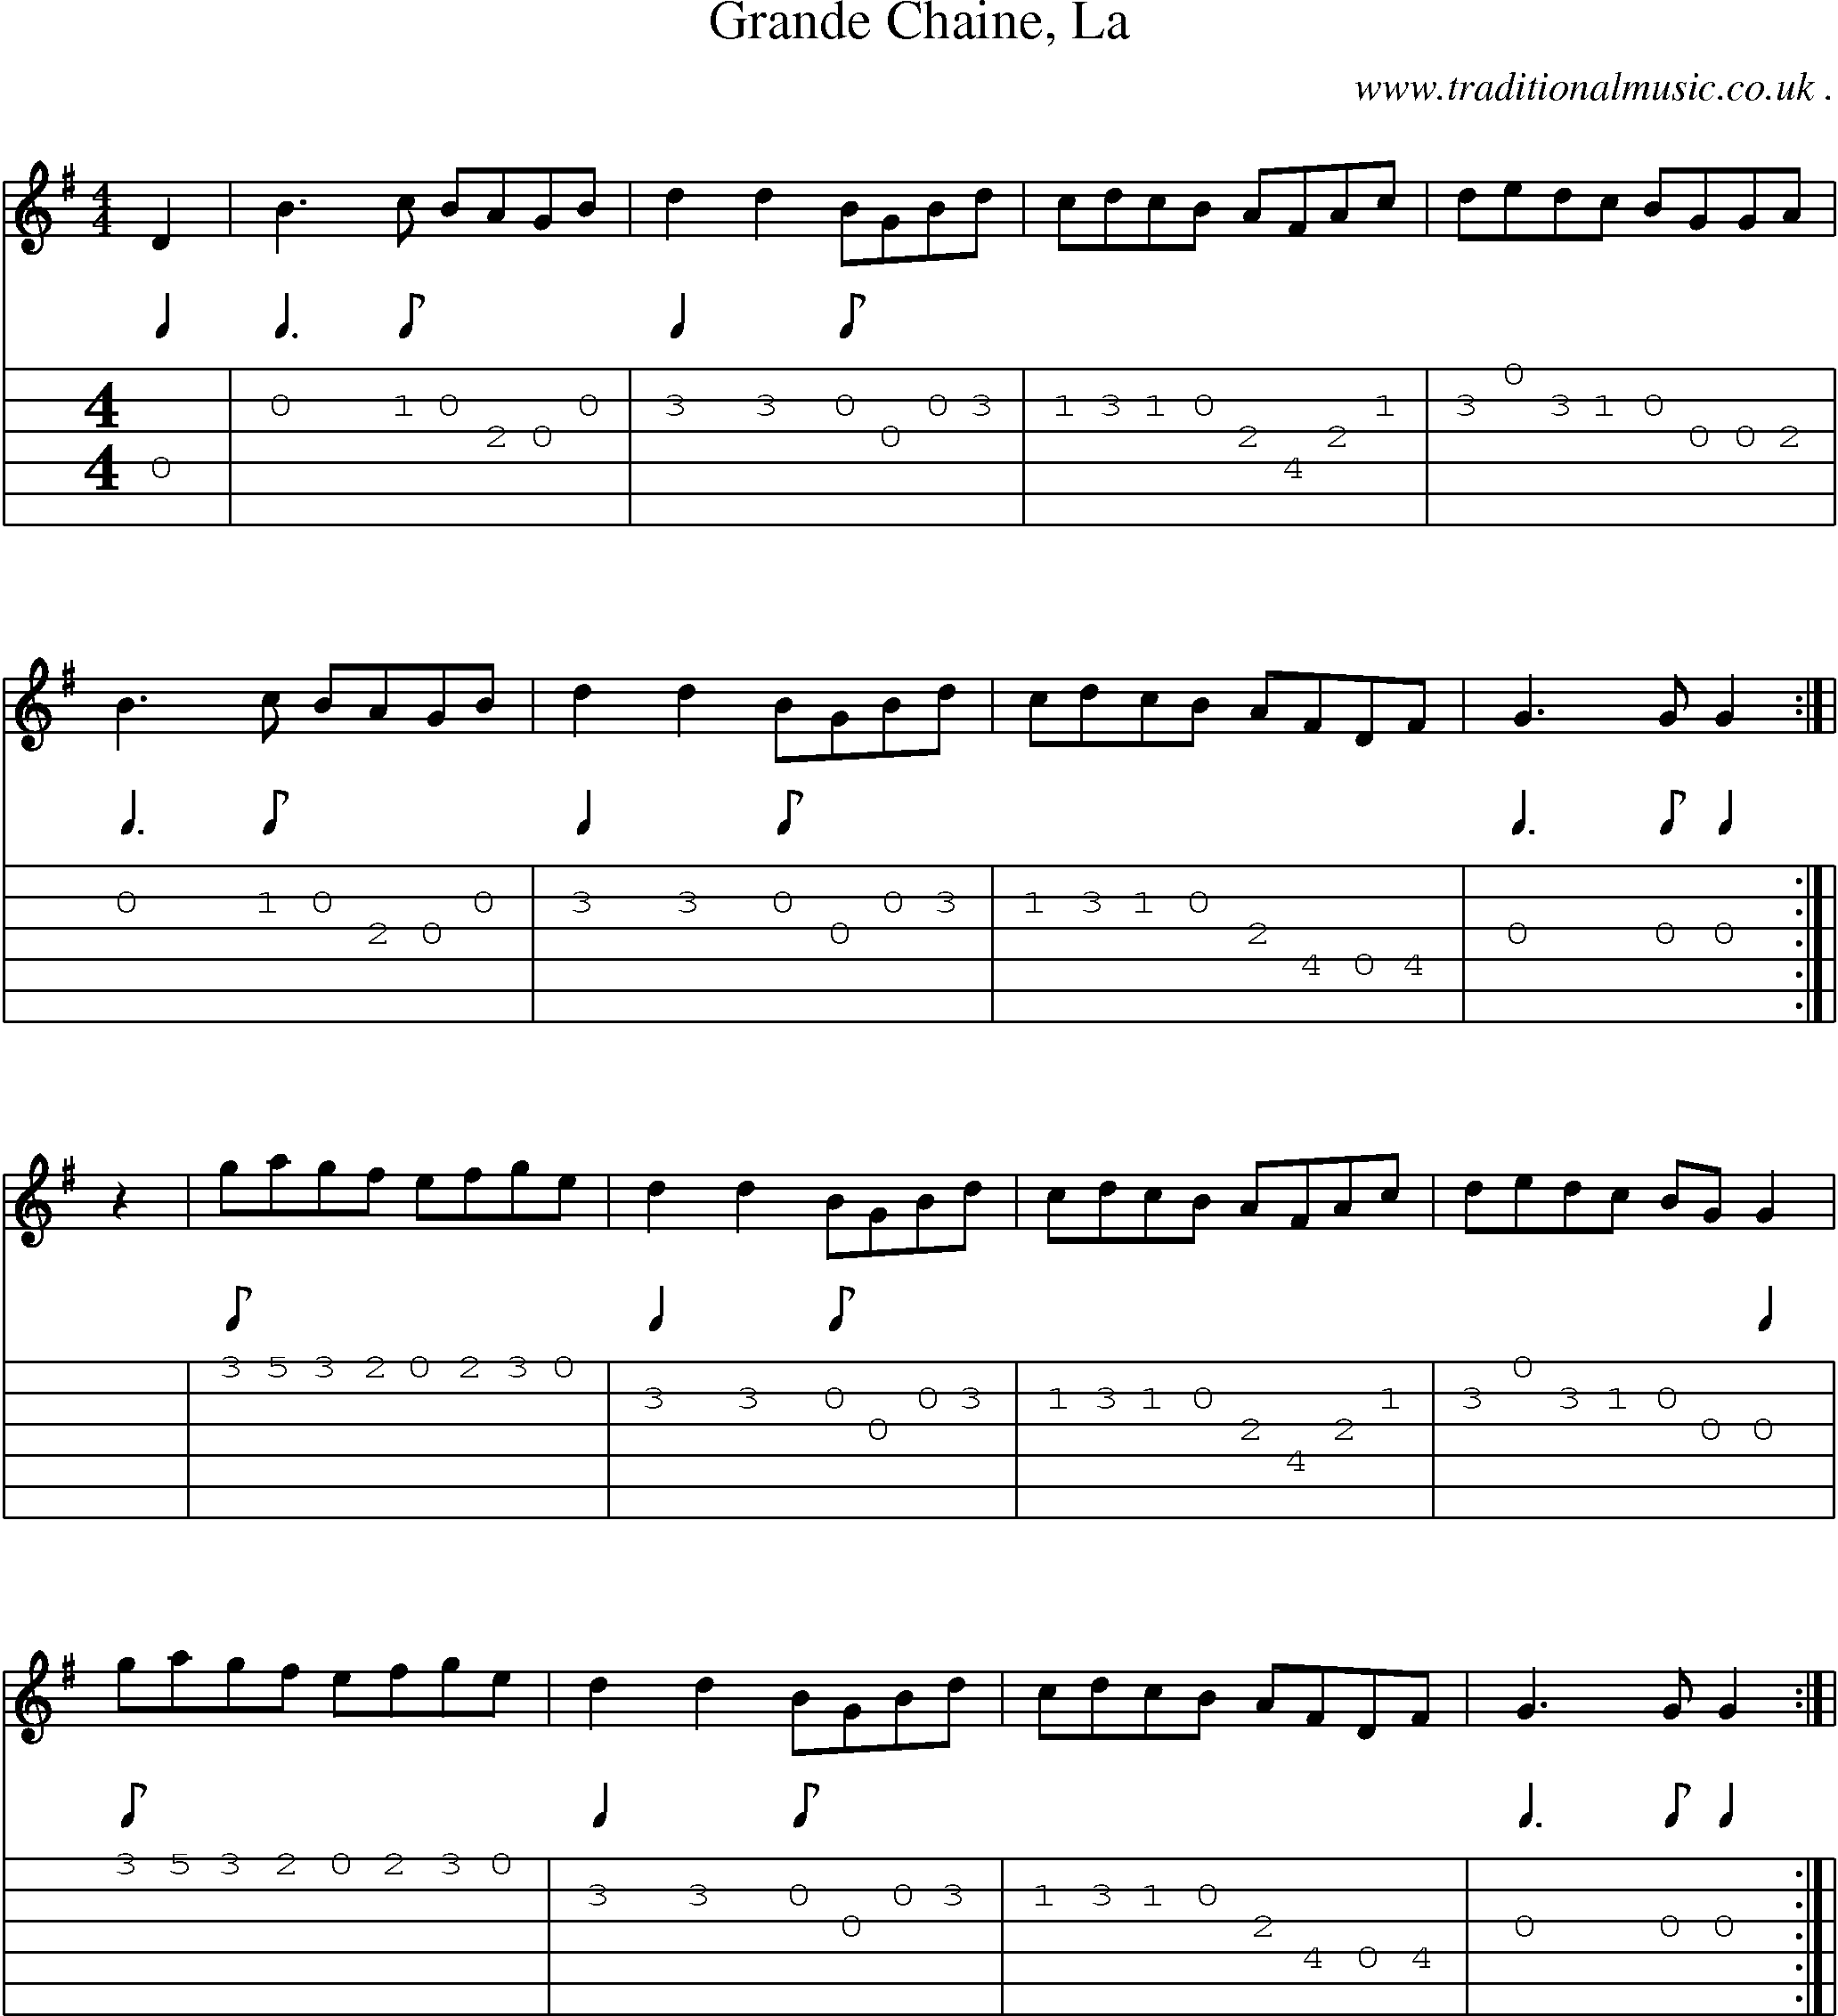 Sheet-Music and Guitar Tabs for Grande Chaine La